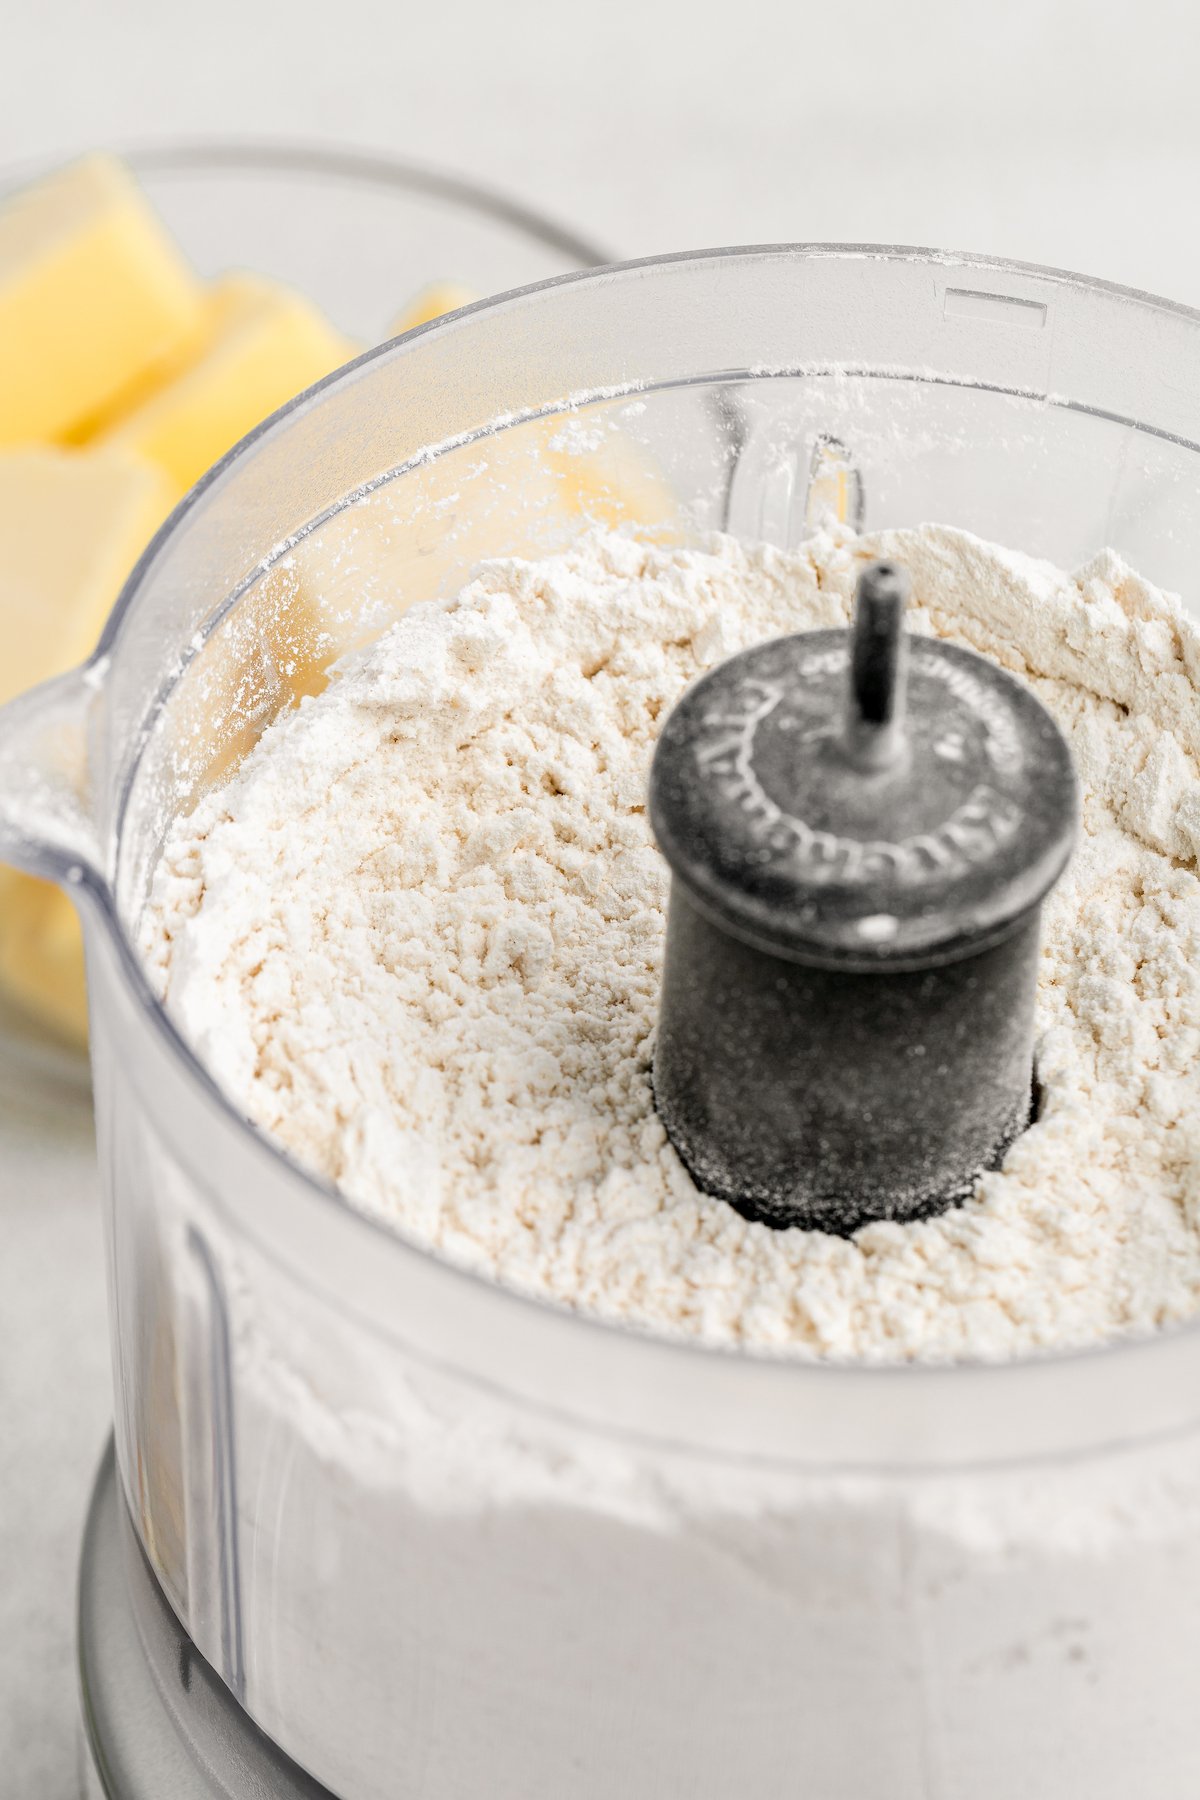 Flour and dry ingredients are added to a food processor.